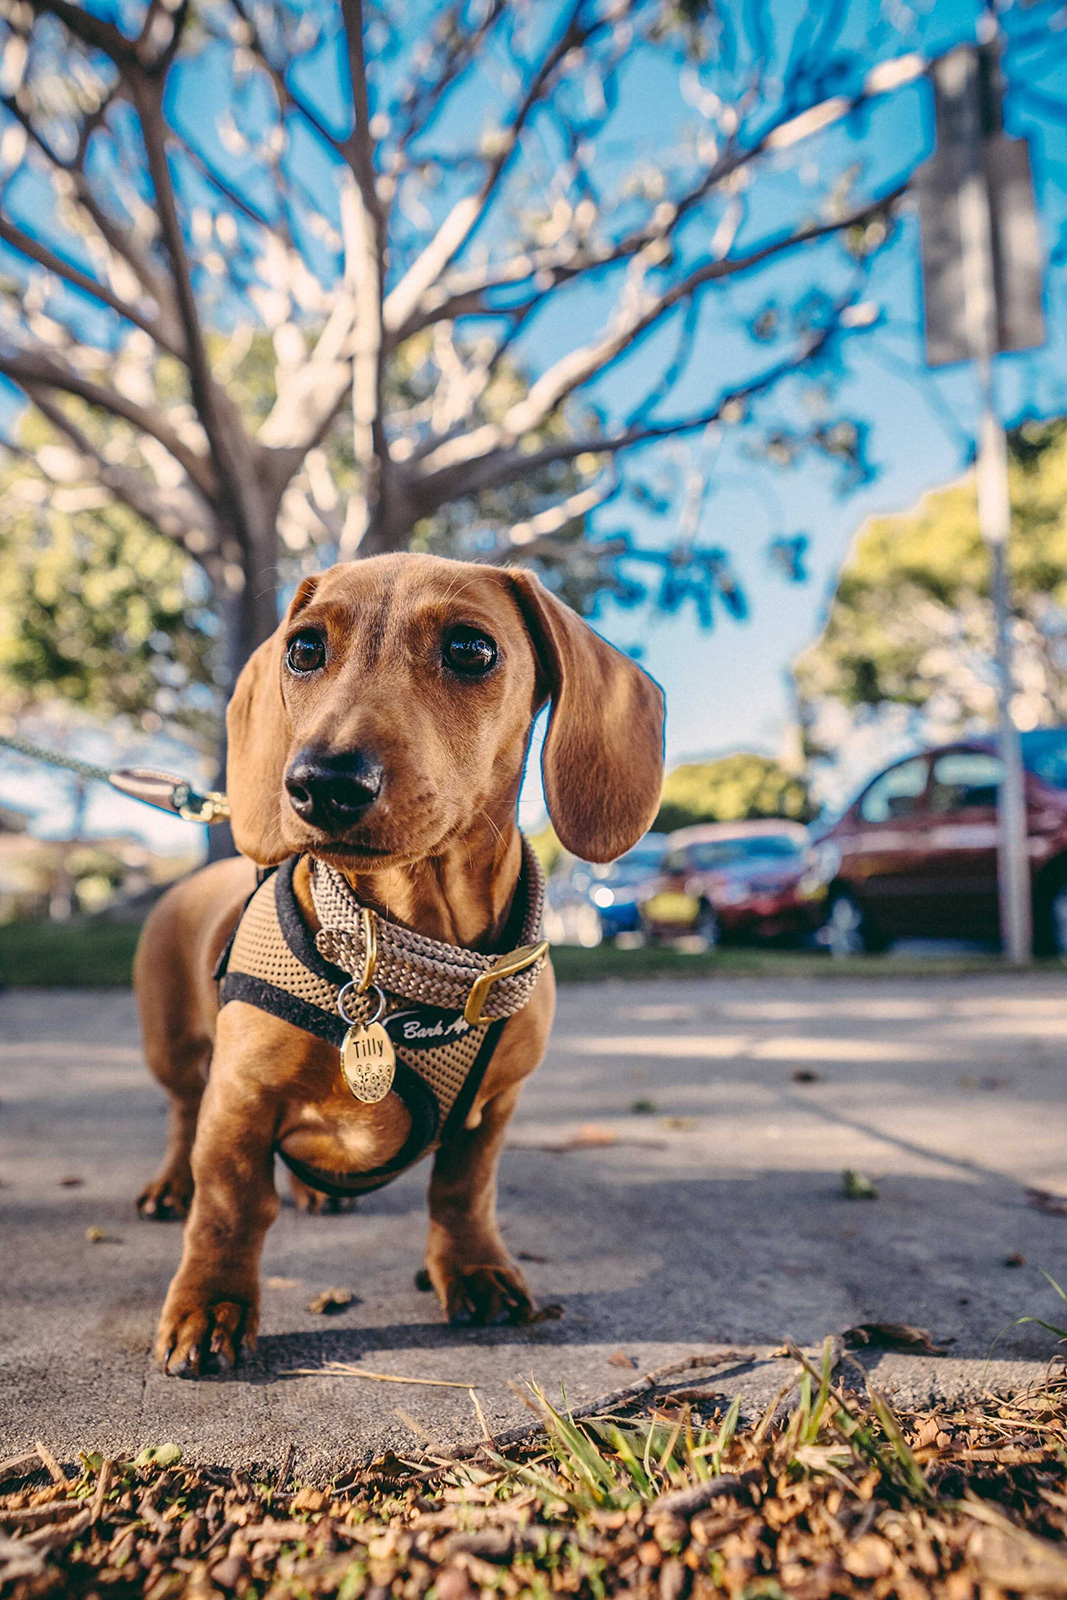 Tilly the dachshund out for an afternoon walk in Los Angeles